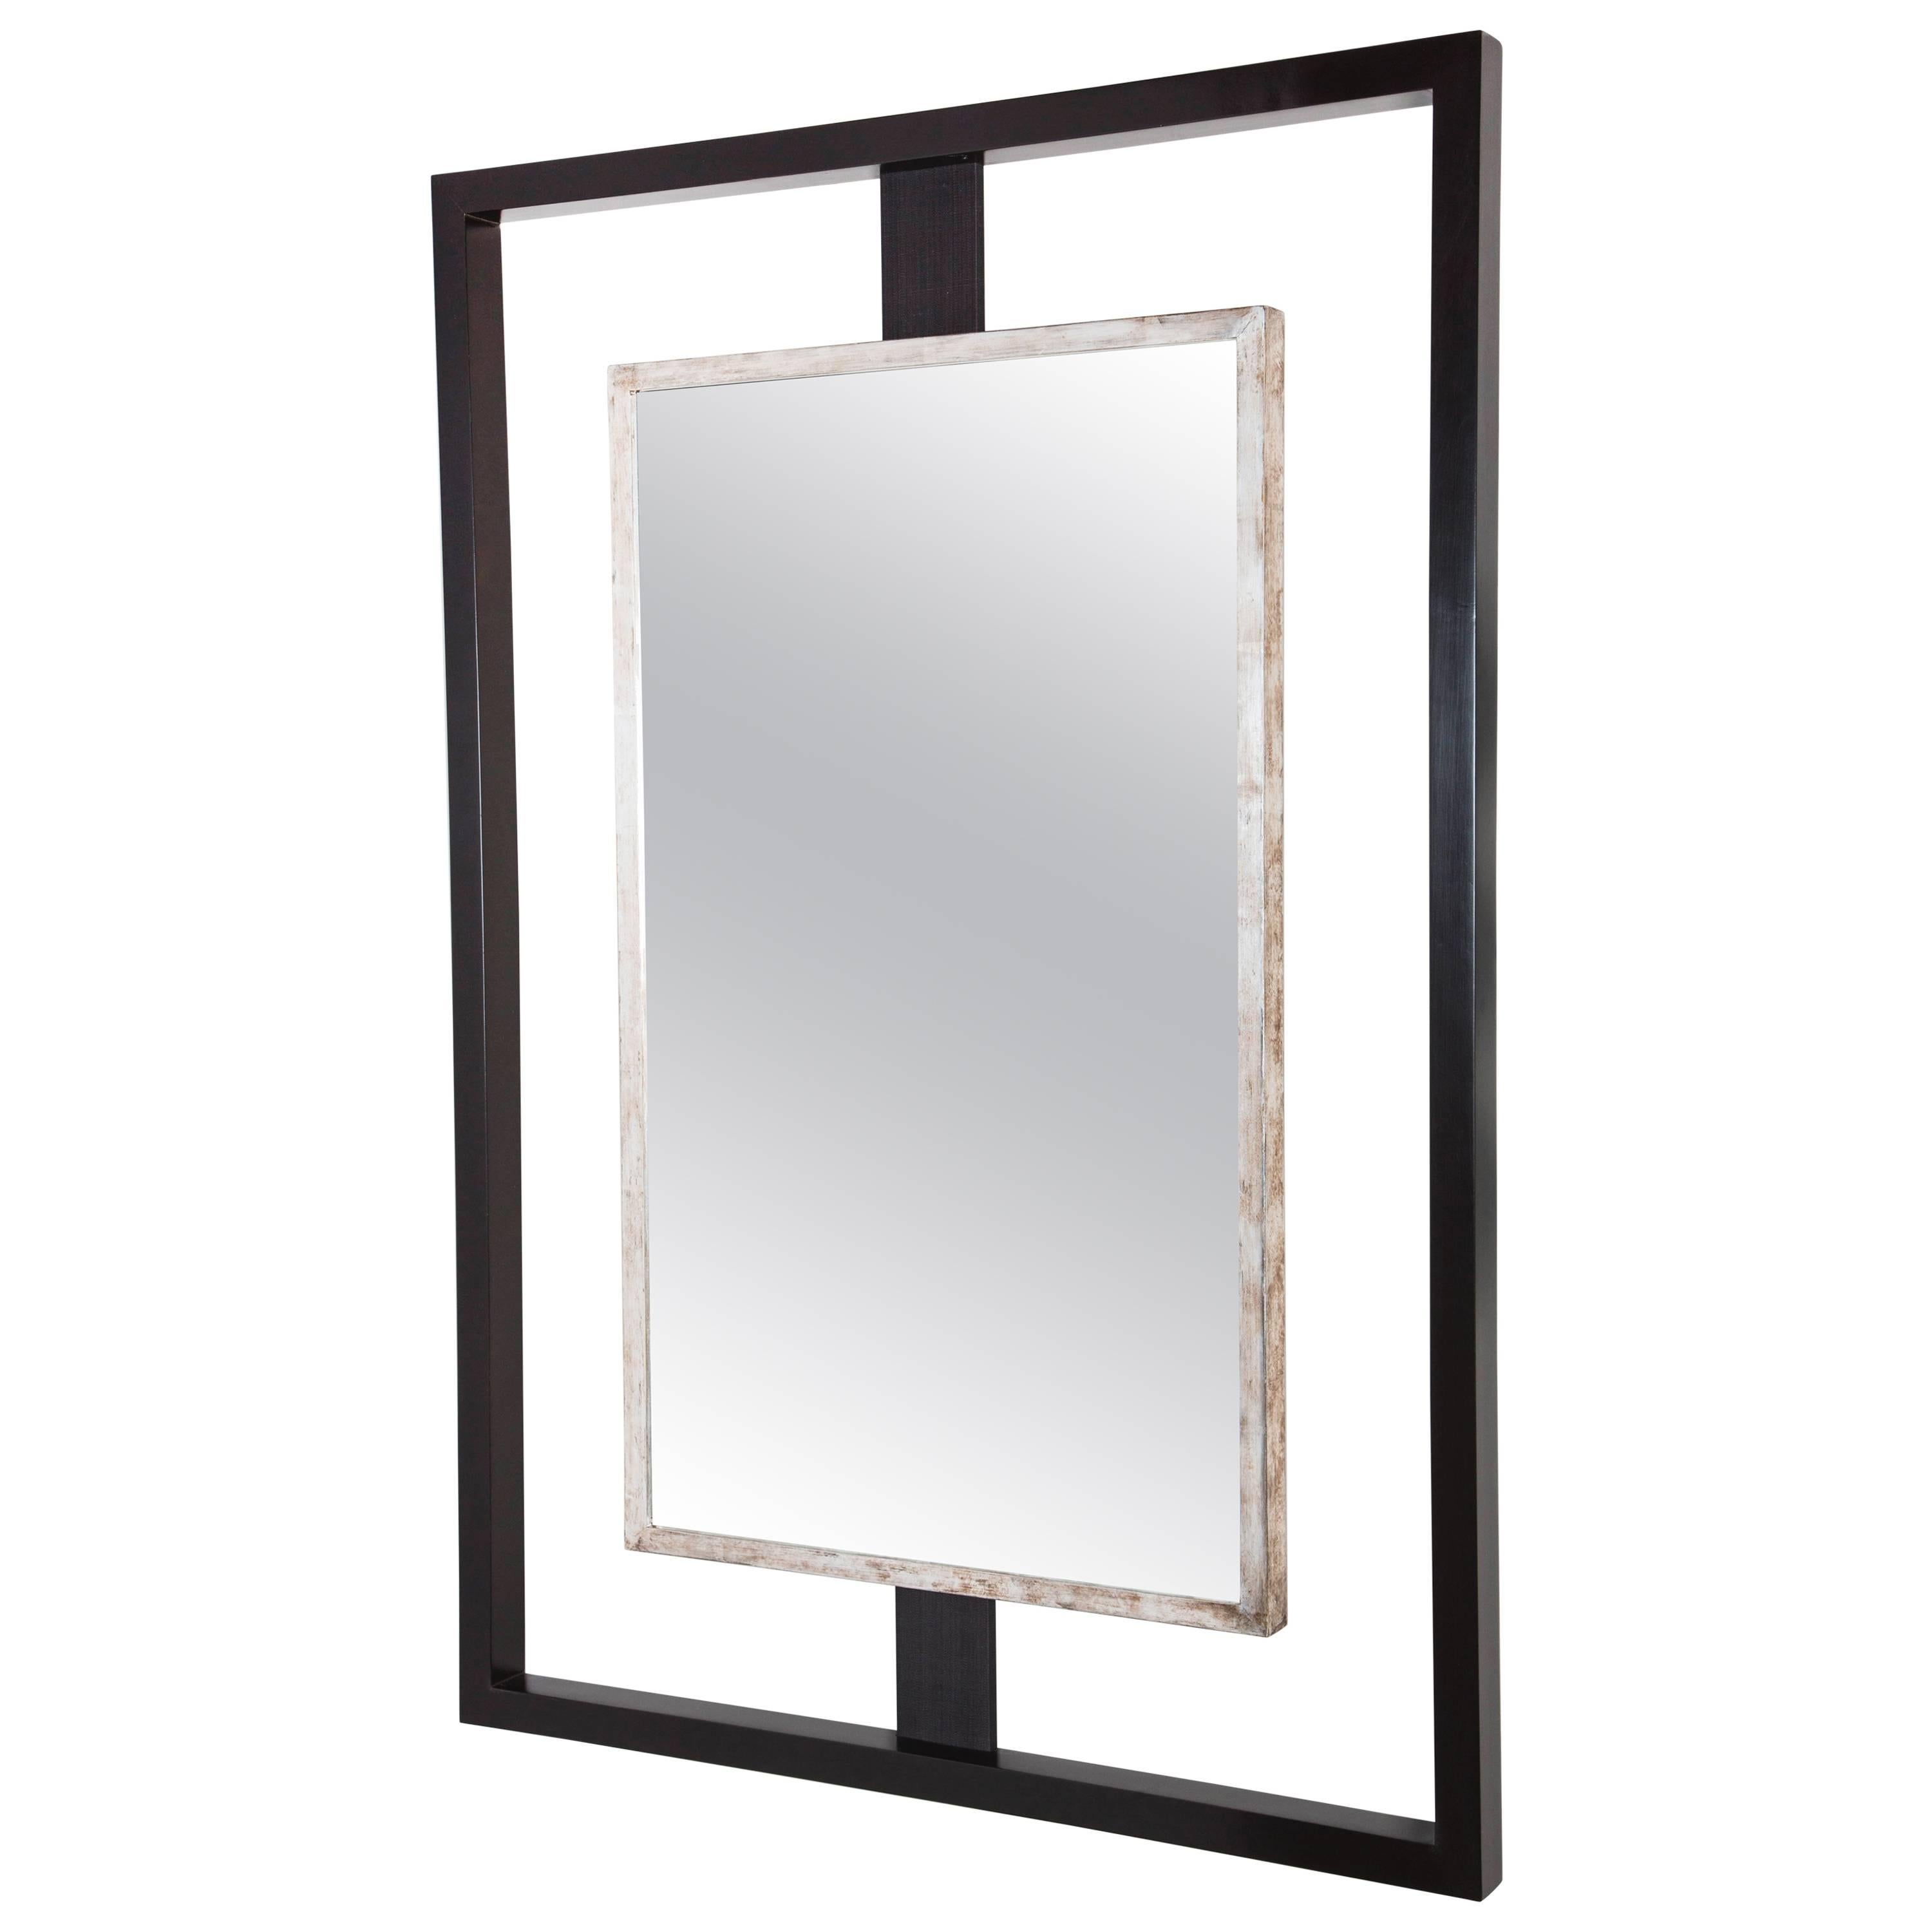 Paul Marra Negative Space Mirror with Distressed Silver Inner Frame For Sale